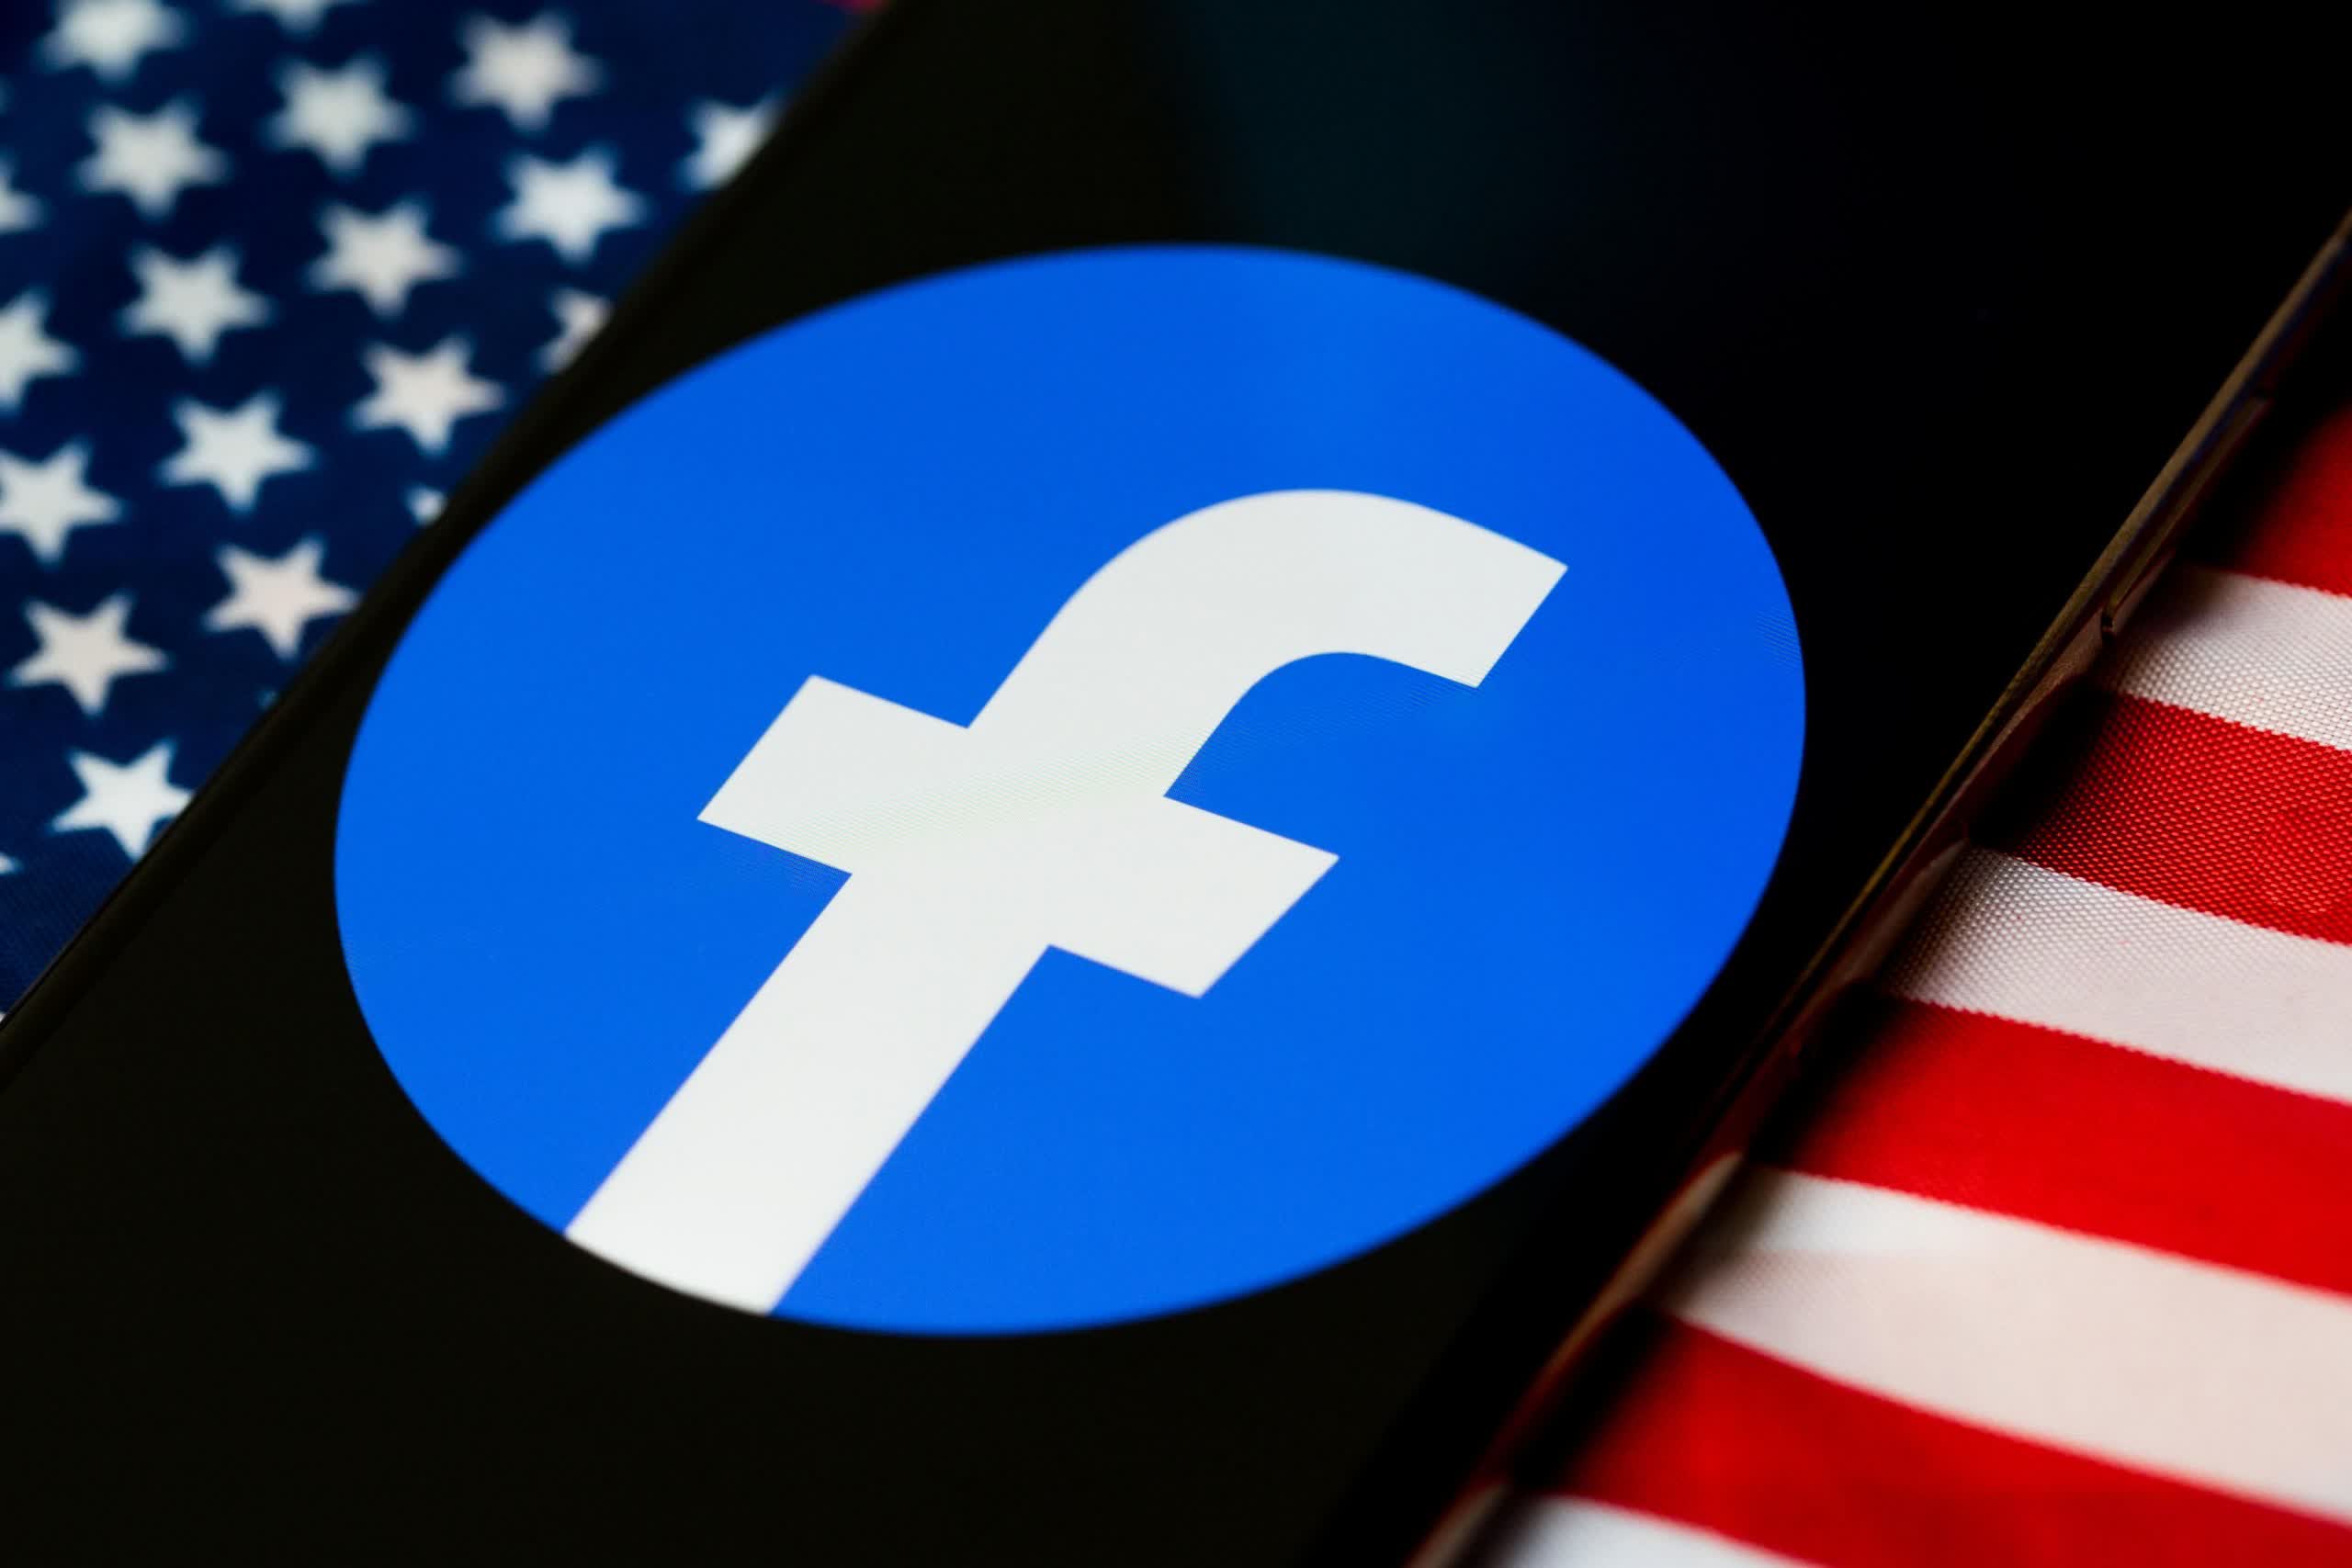 Facebook will pay you to deactivate your account before the 2020 election